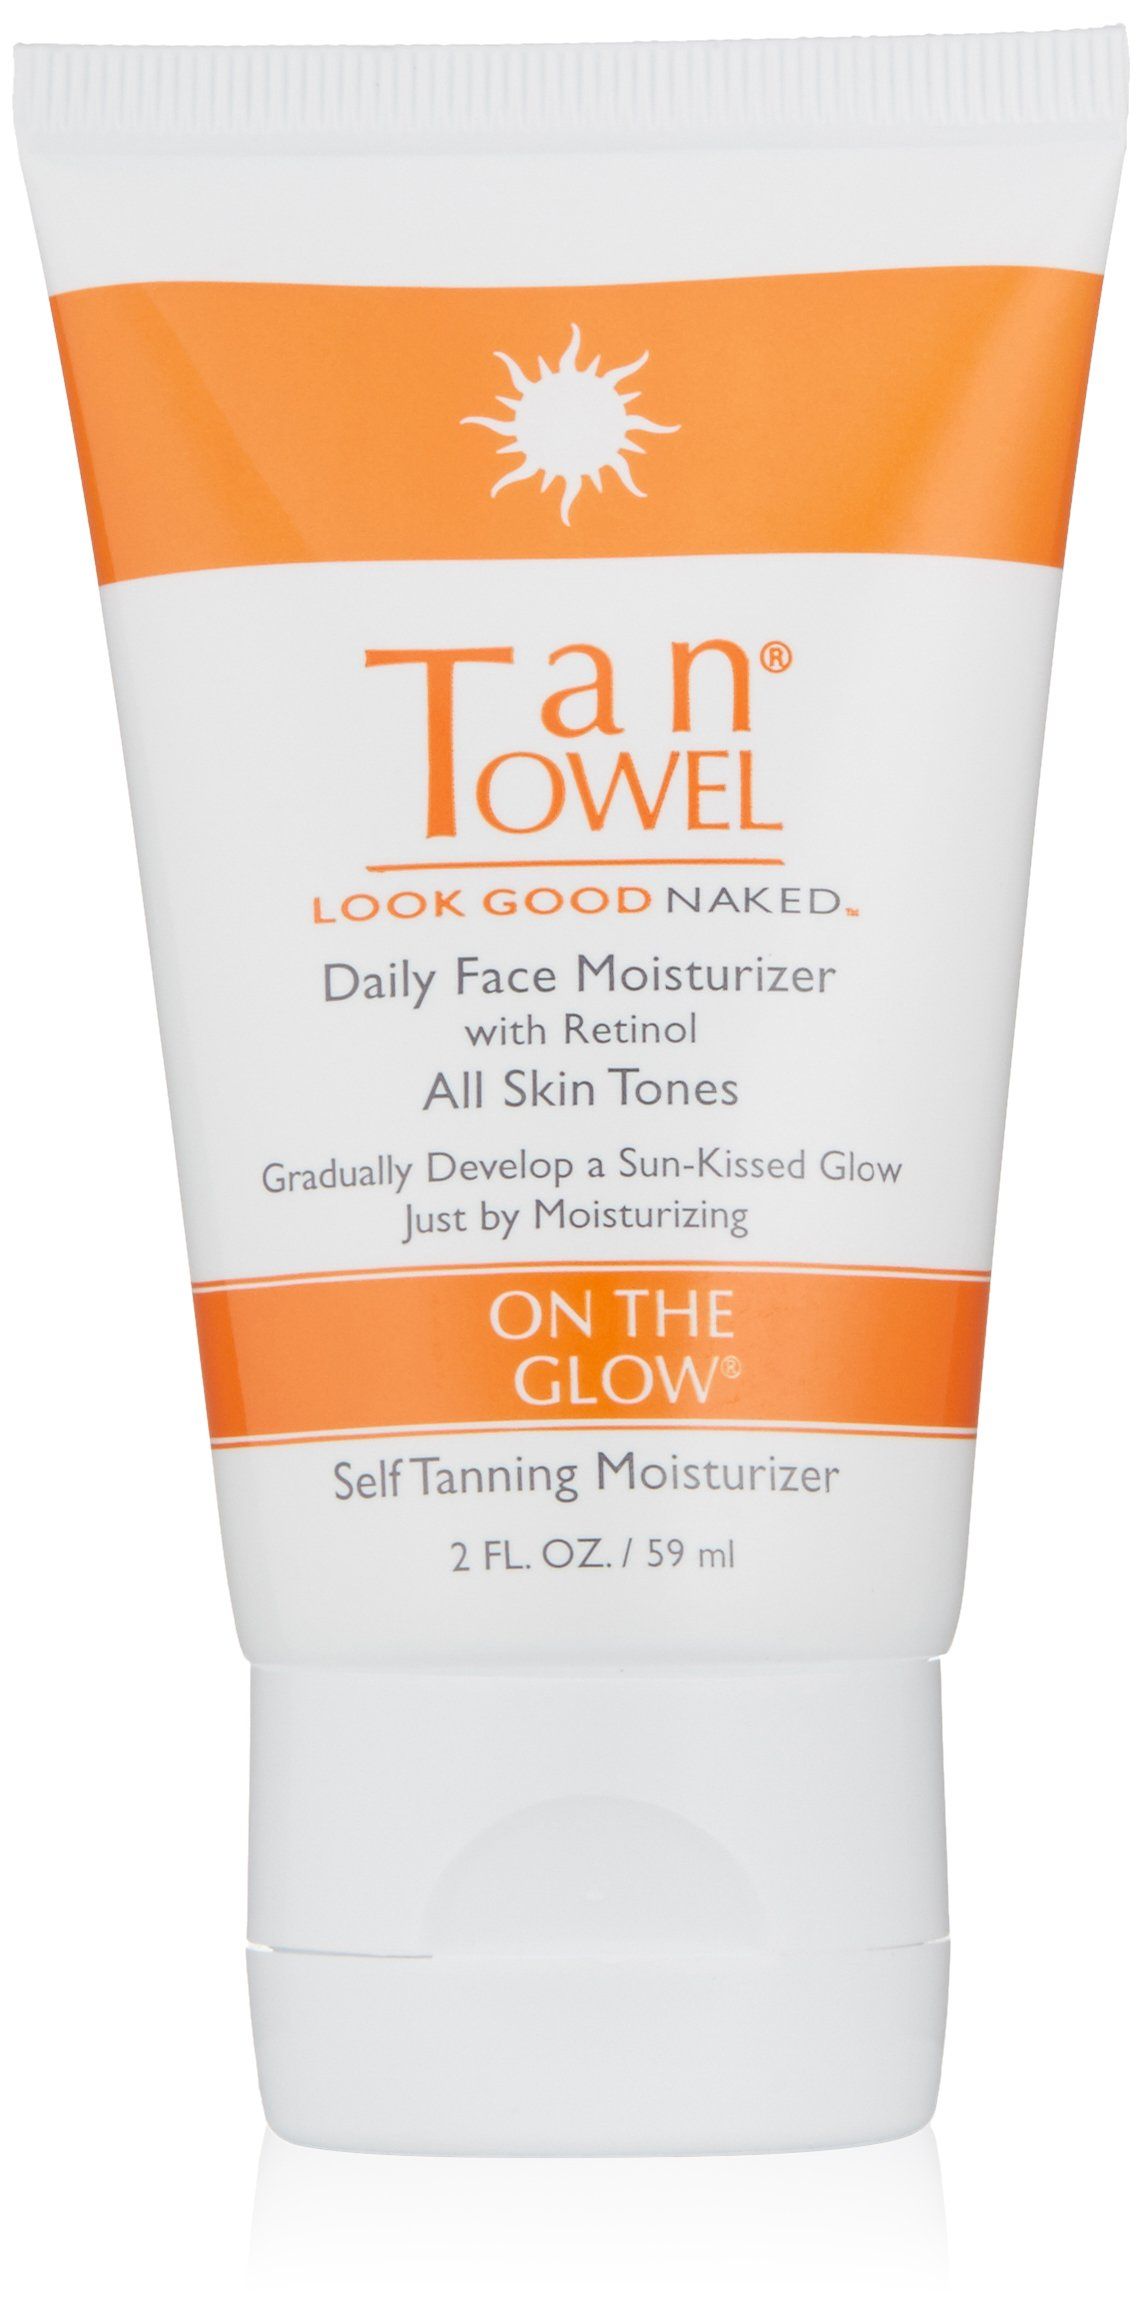 Scavenger reccomend Tan and moist and naked